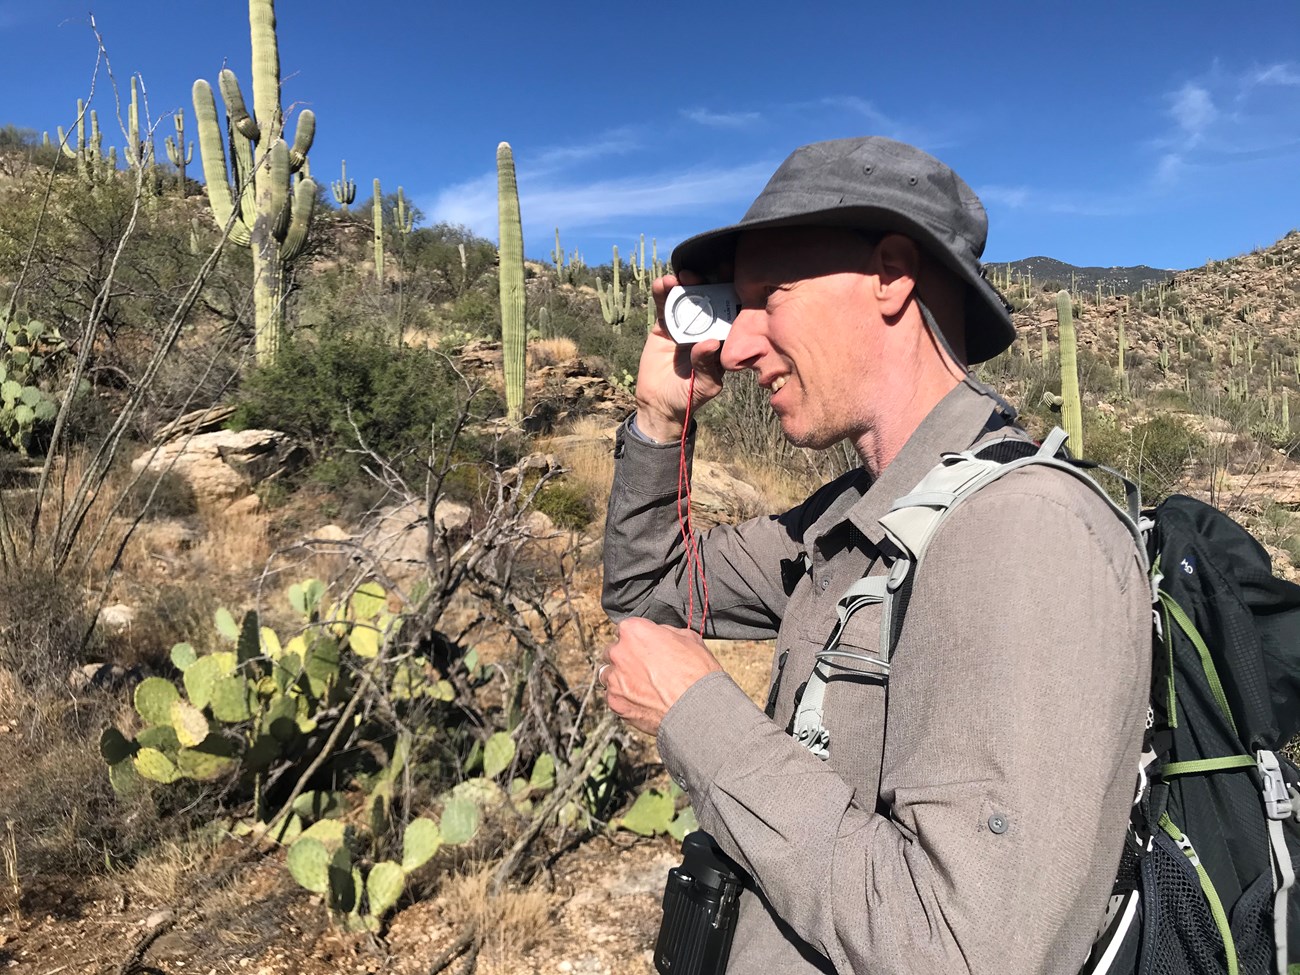 A side profile of a man wearing a grey hat and shirt. He is looking through a clinometer to find the height of a saguaro in front of him